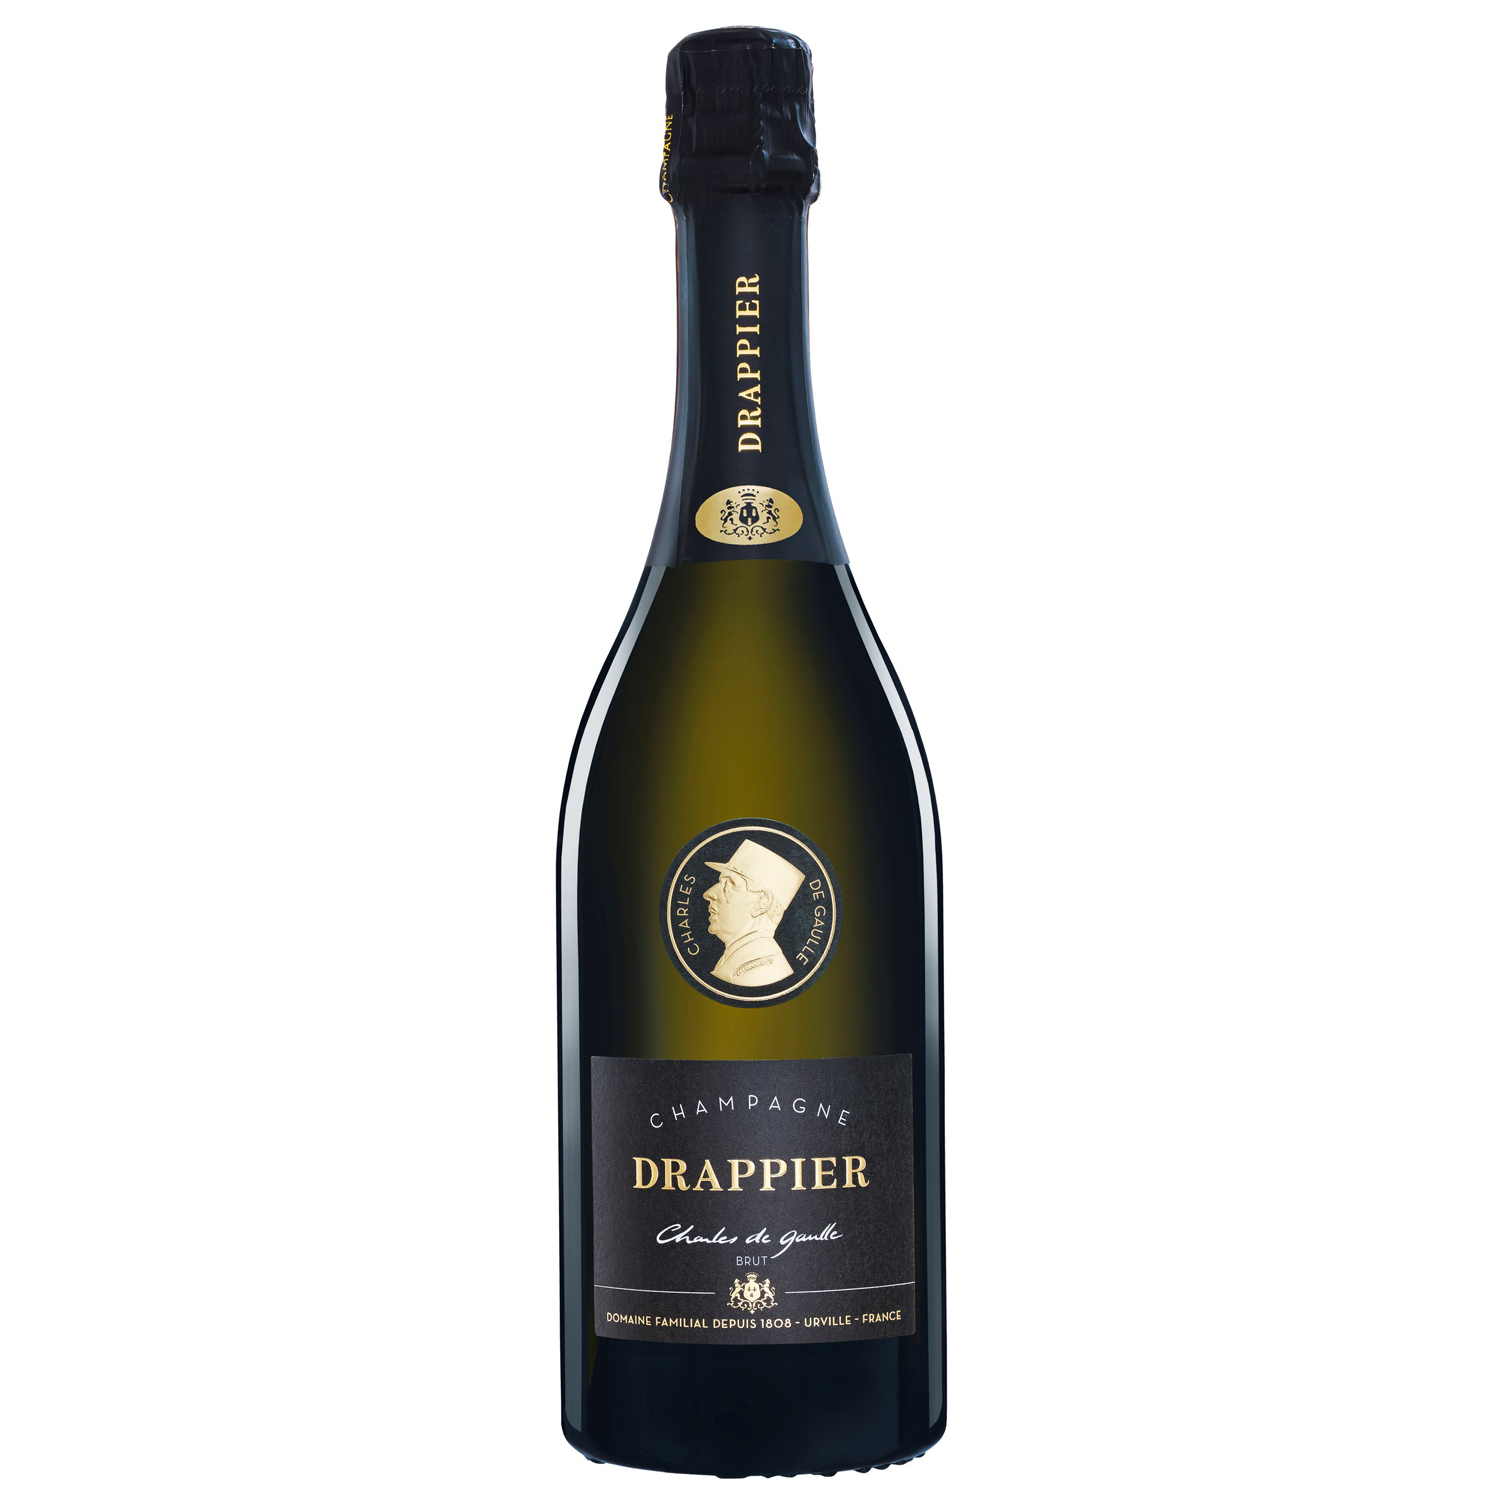 Champagne Drappier: Charles de Gaulle